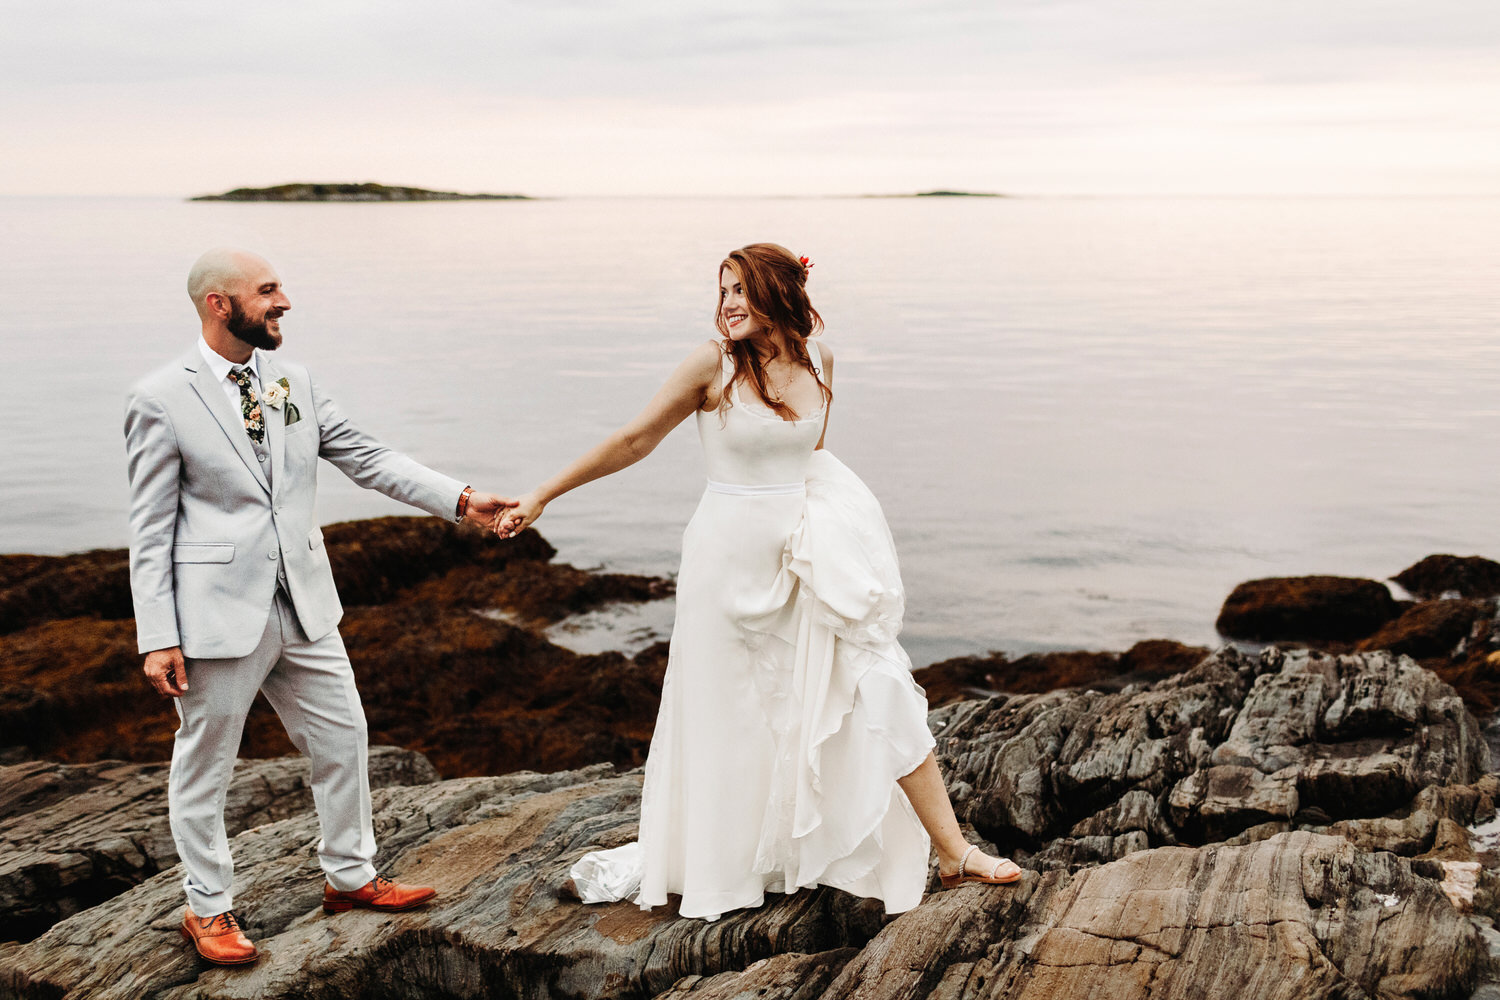 Bride and groom walking together on cliffs in Orr's Island, Maine